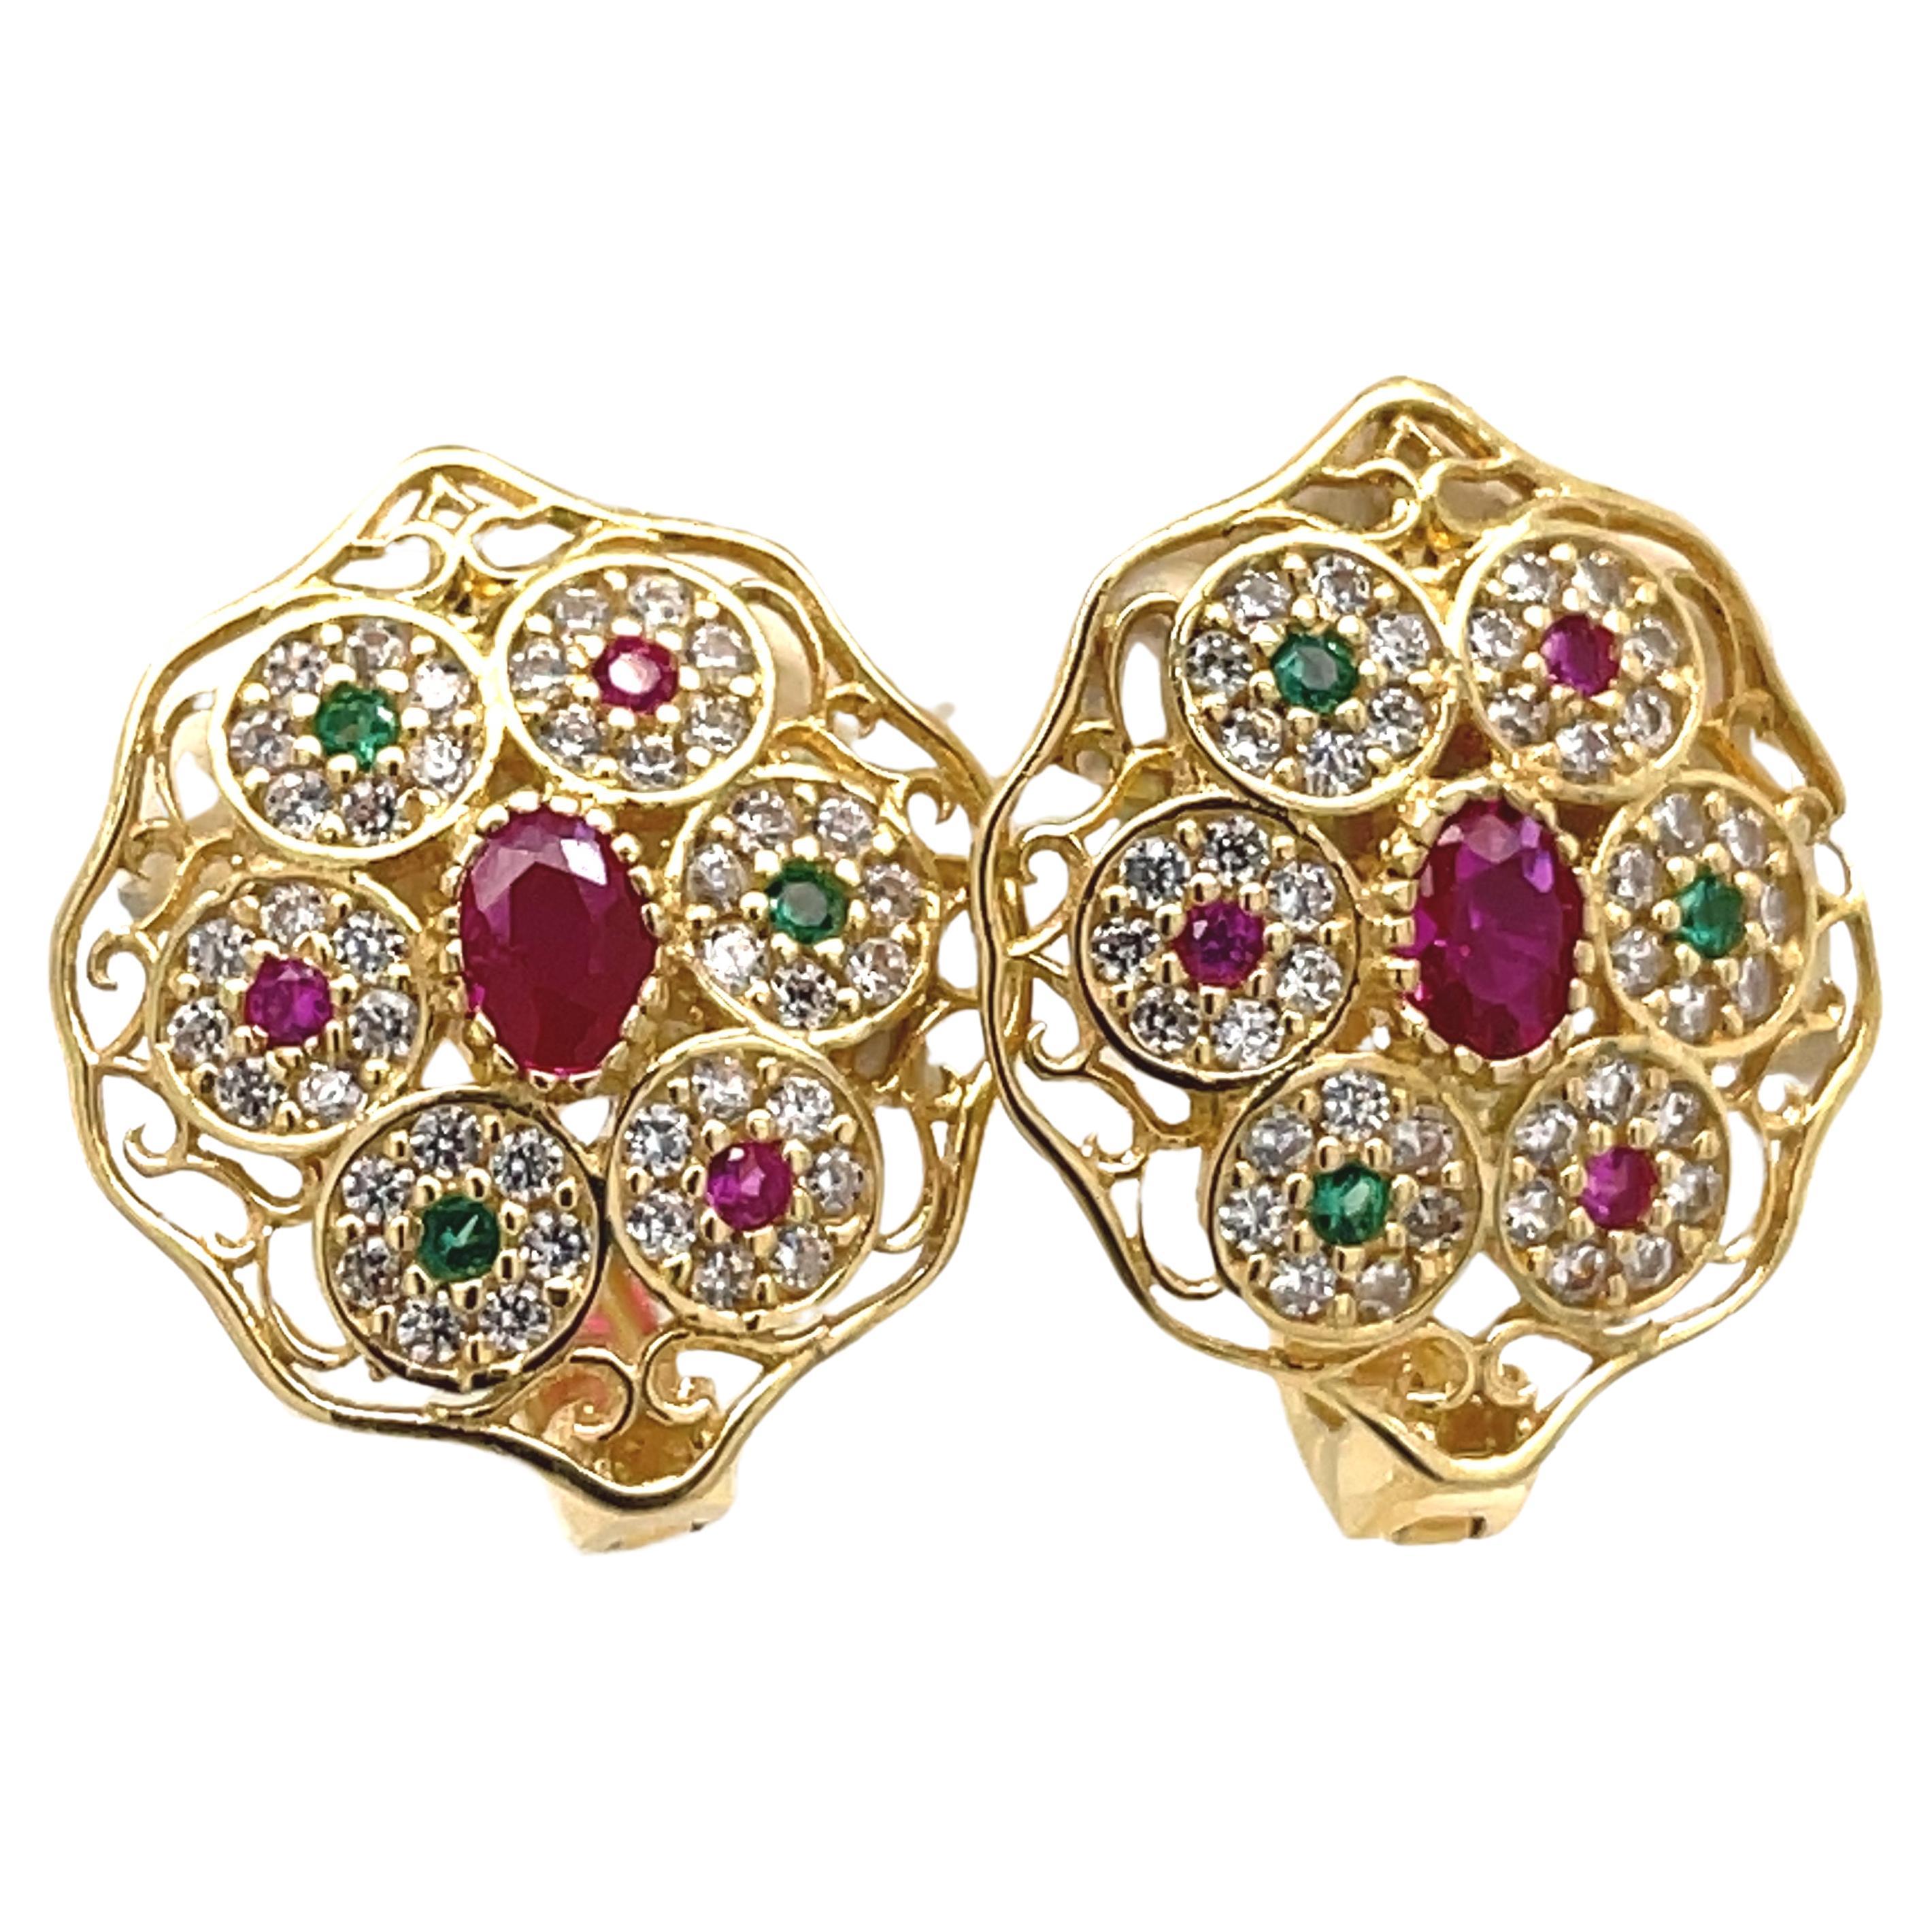 Vintage Art Deco Earrings- 18k Yellow Gold Oval+Round Multi-Color Cubic Zirconia